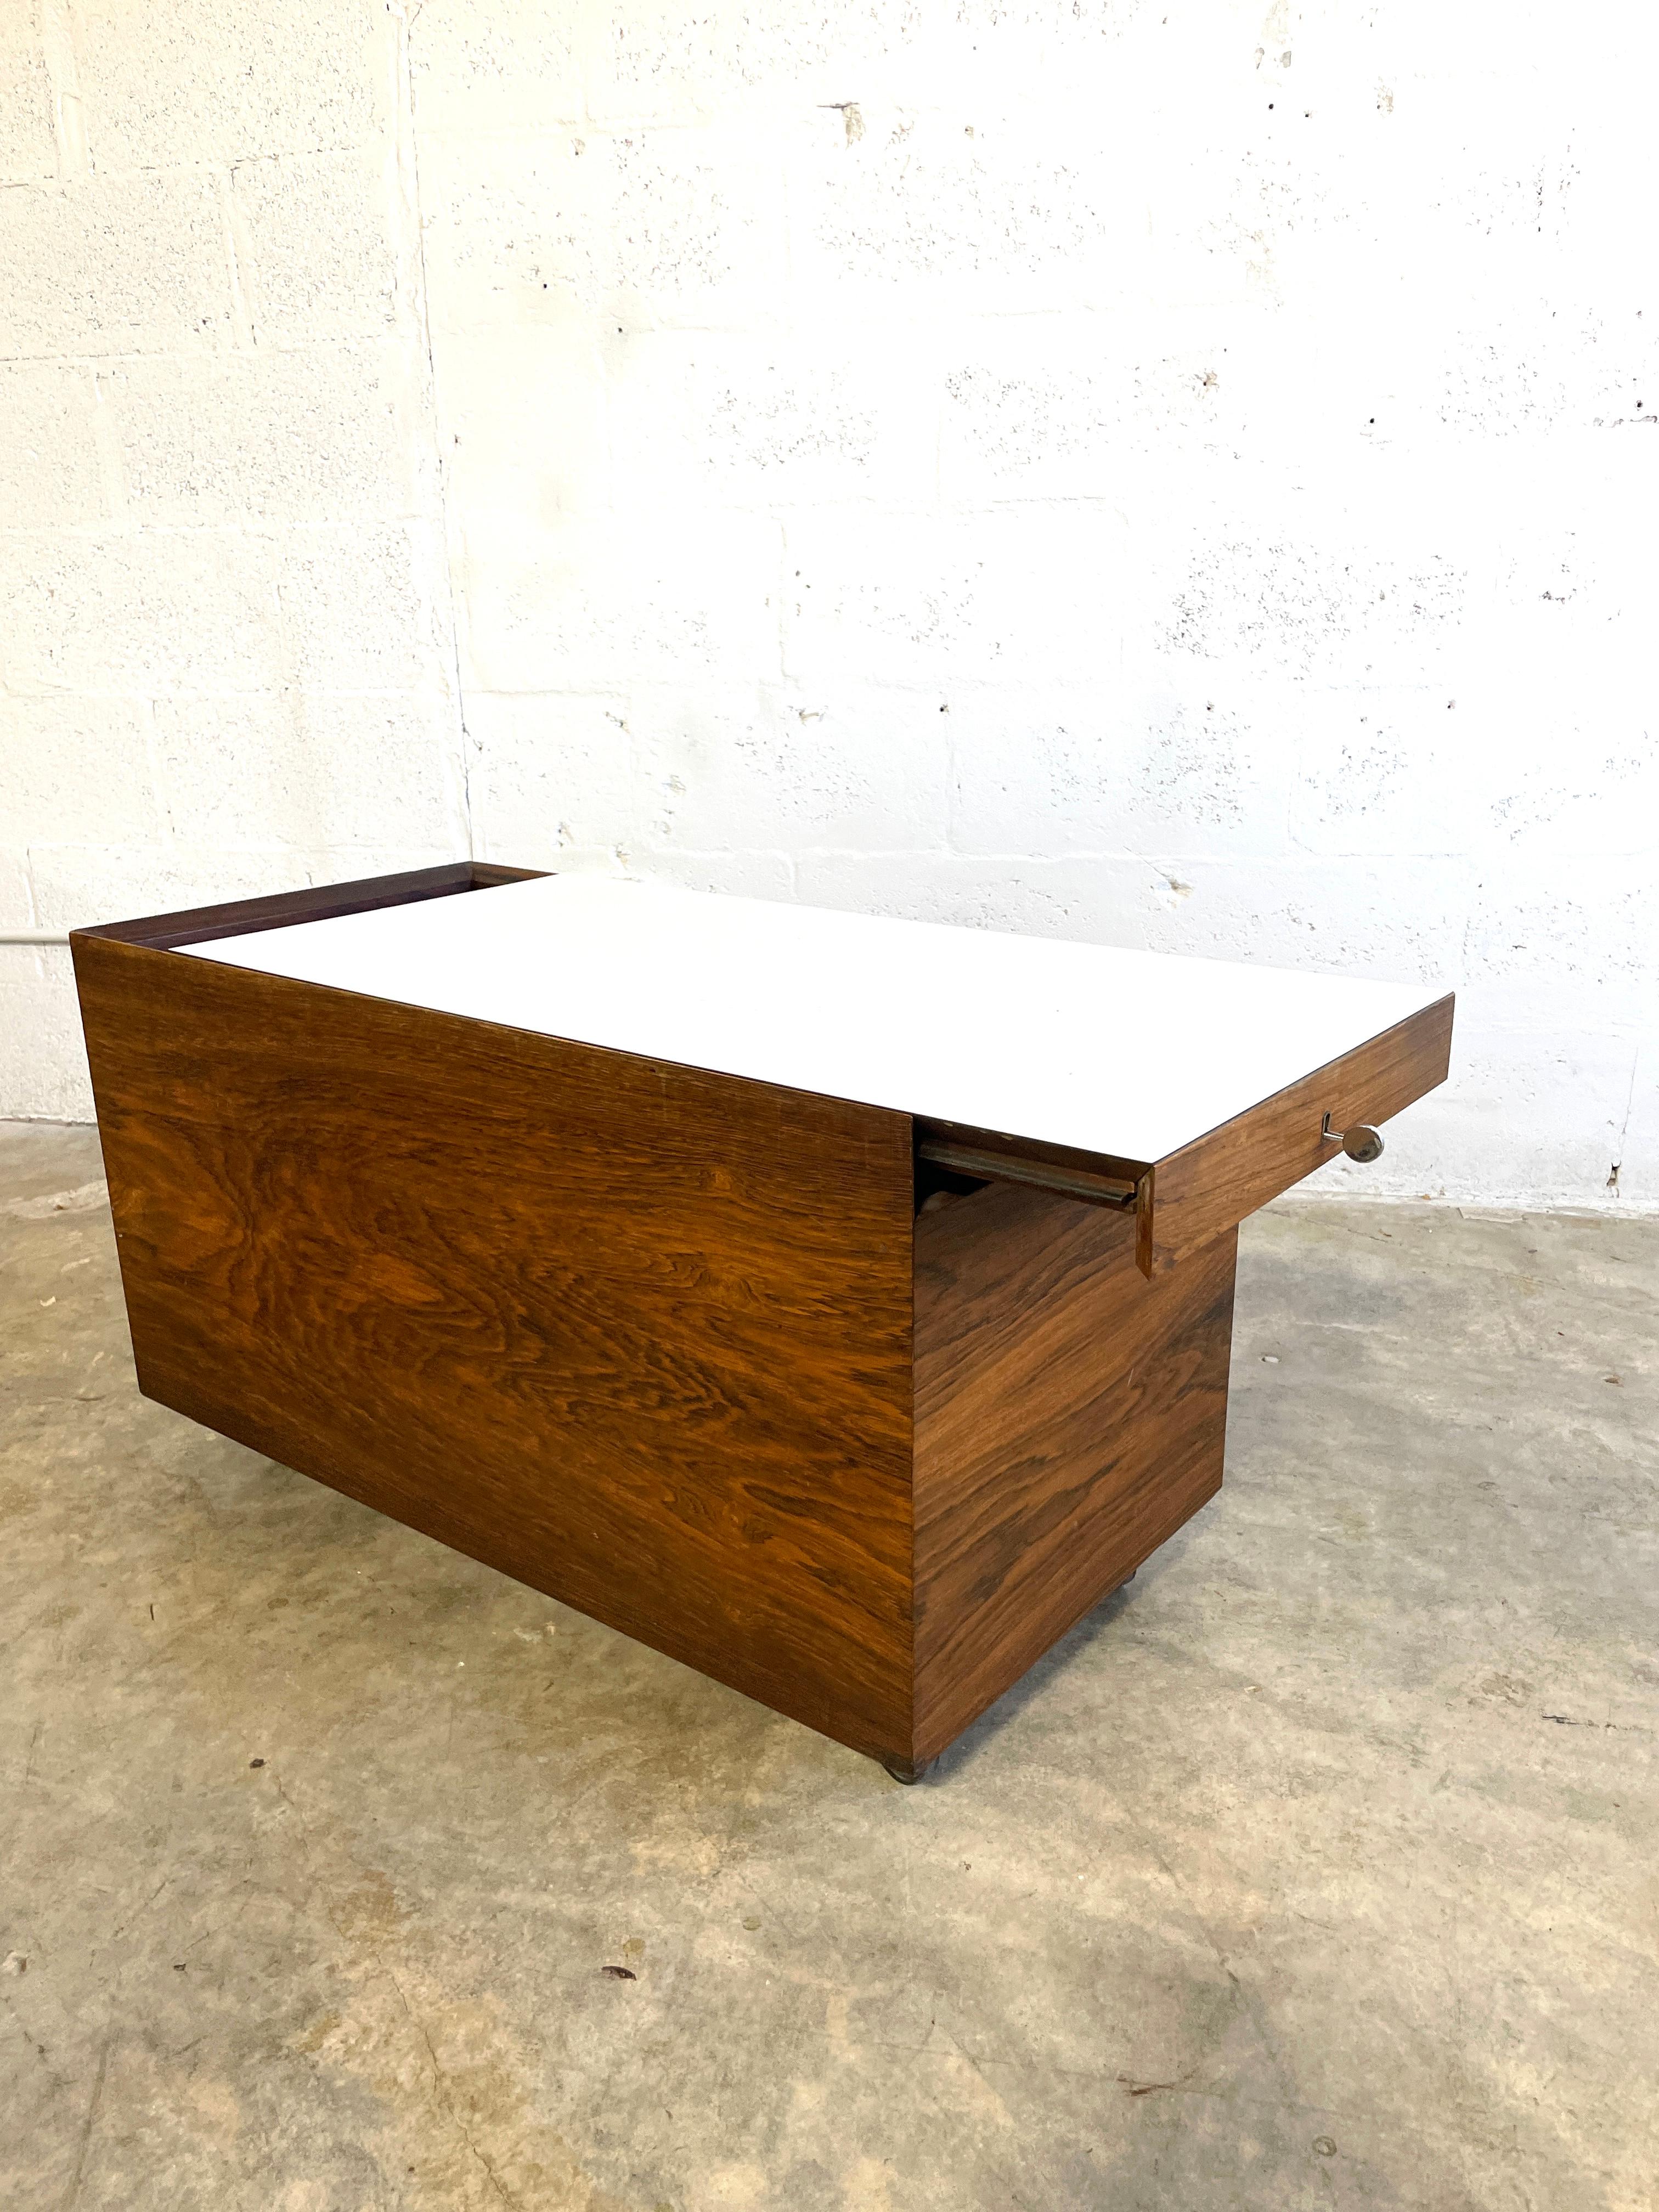 Rare dry bar table on wheels designed by Poul Norreklit and manufactured by Dyrlund, Denmark 1960. Top slides and reveals storage inside. 33wide 16.5d 19h